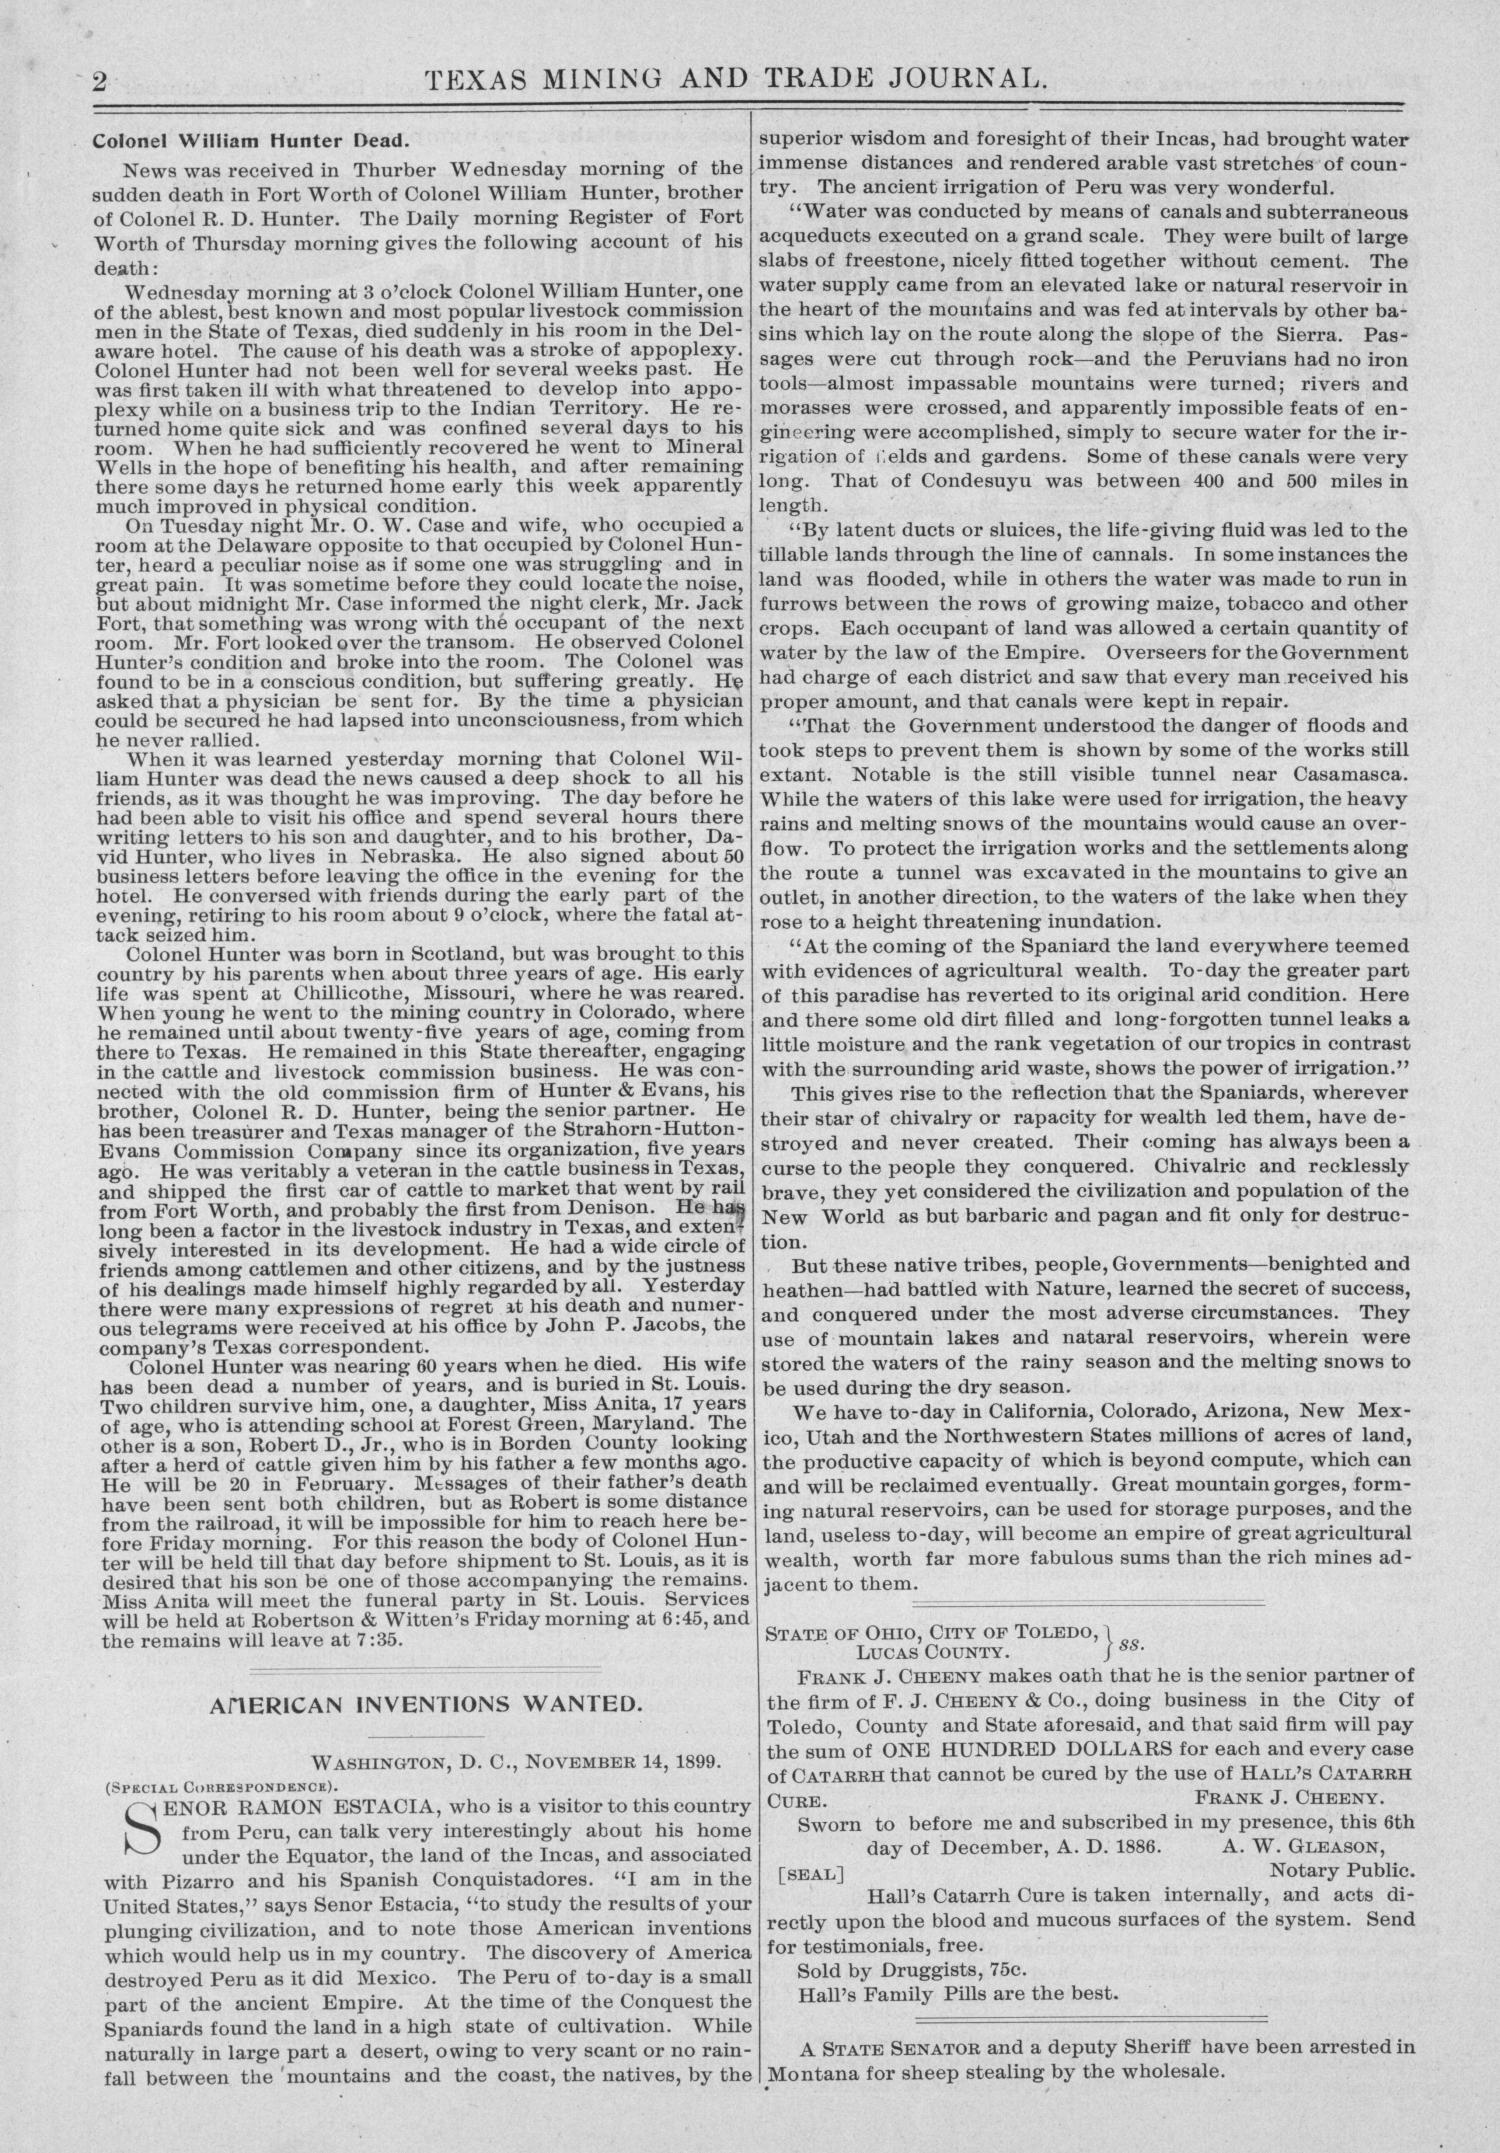 Texas Mining and Trade Journal, Volume 4, Number 18, Saturday, November 18, 1899
                                                
                                                    2
                                                